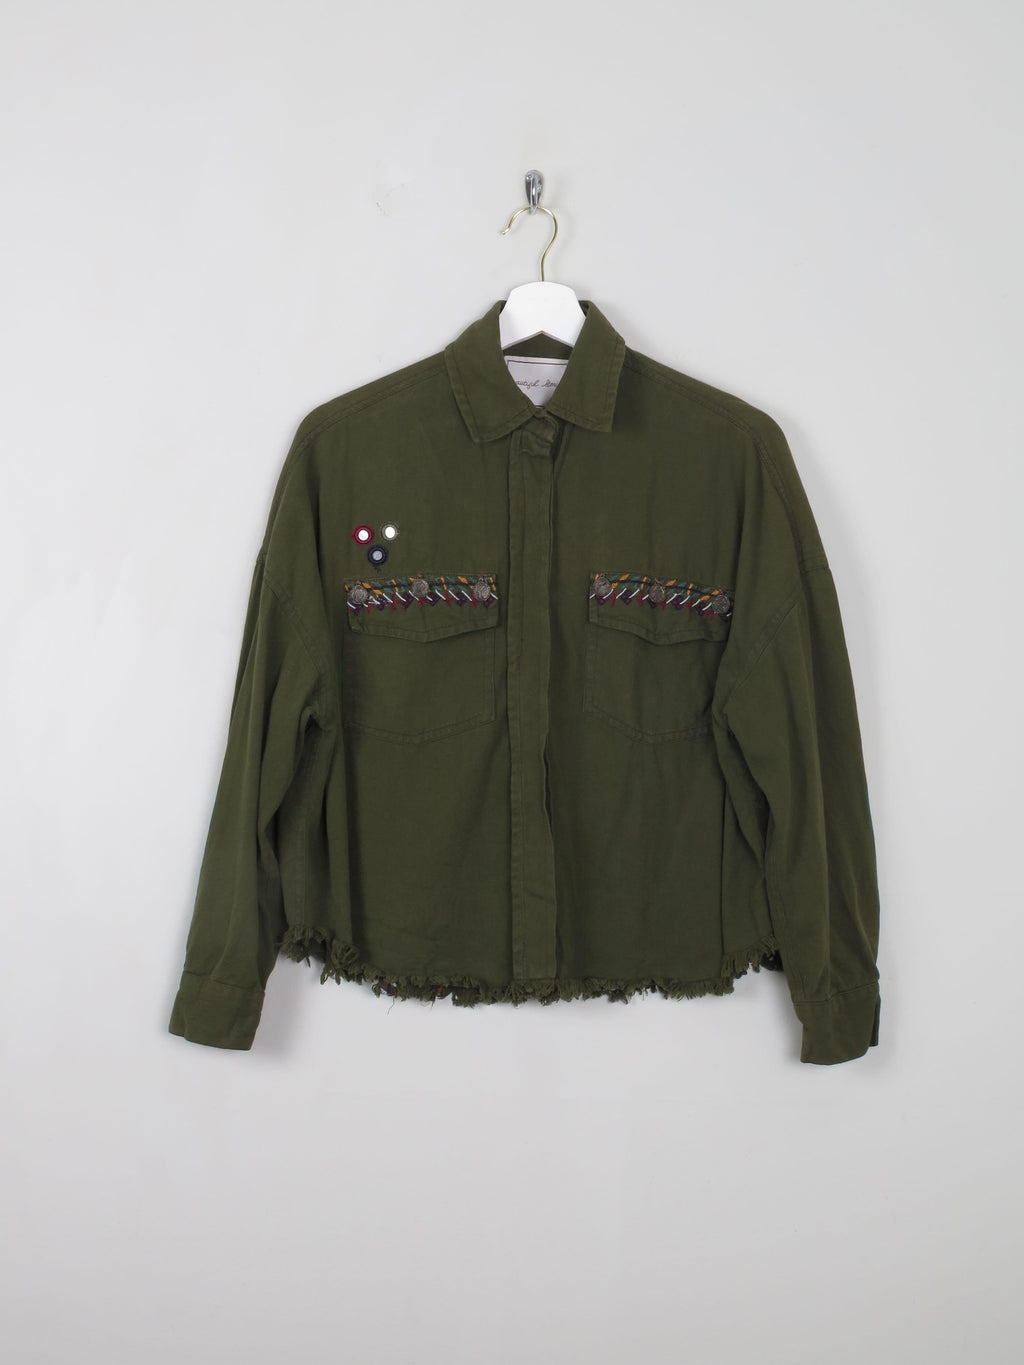 Women's Green Military Style Cropped Shirt/Jacket S/M